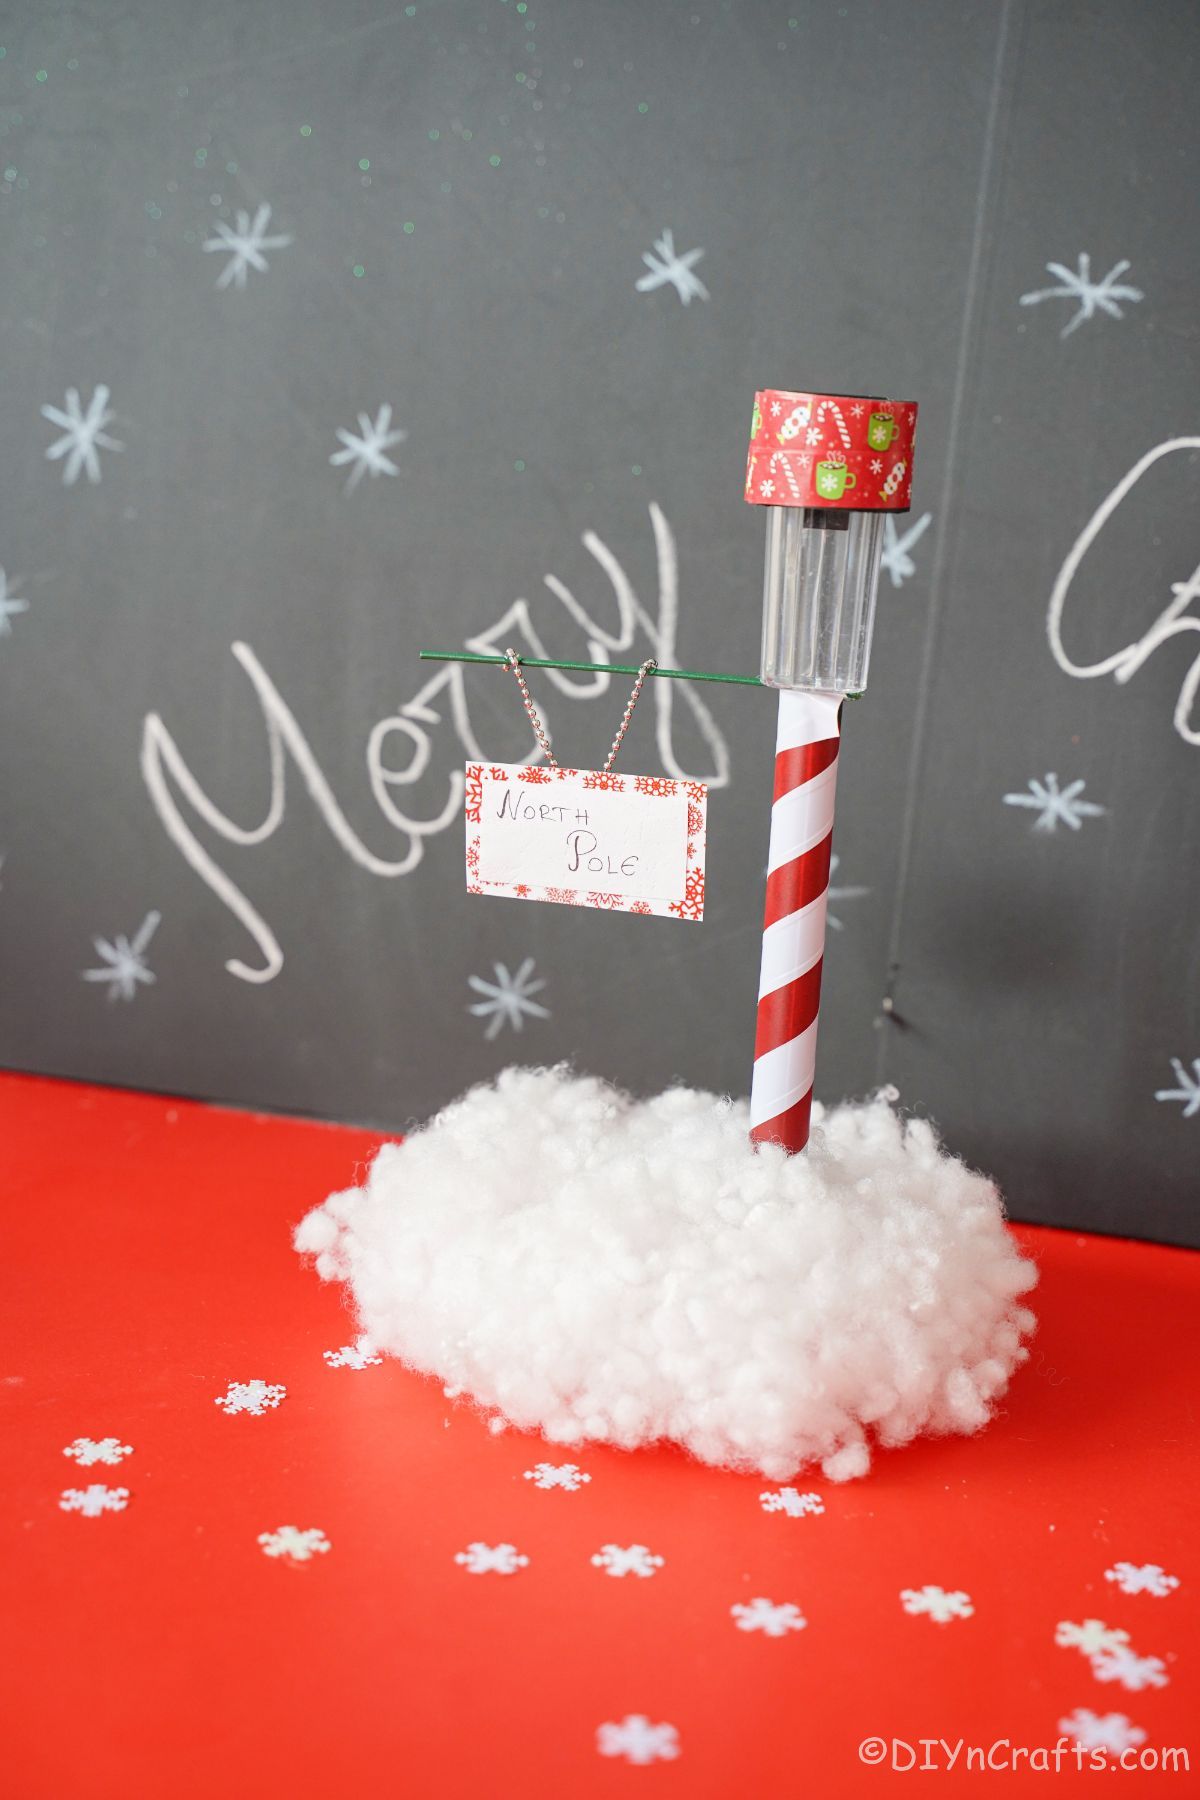 north pole street sign on red table with chalkboard in background